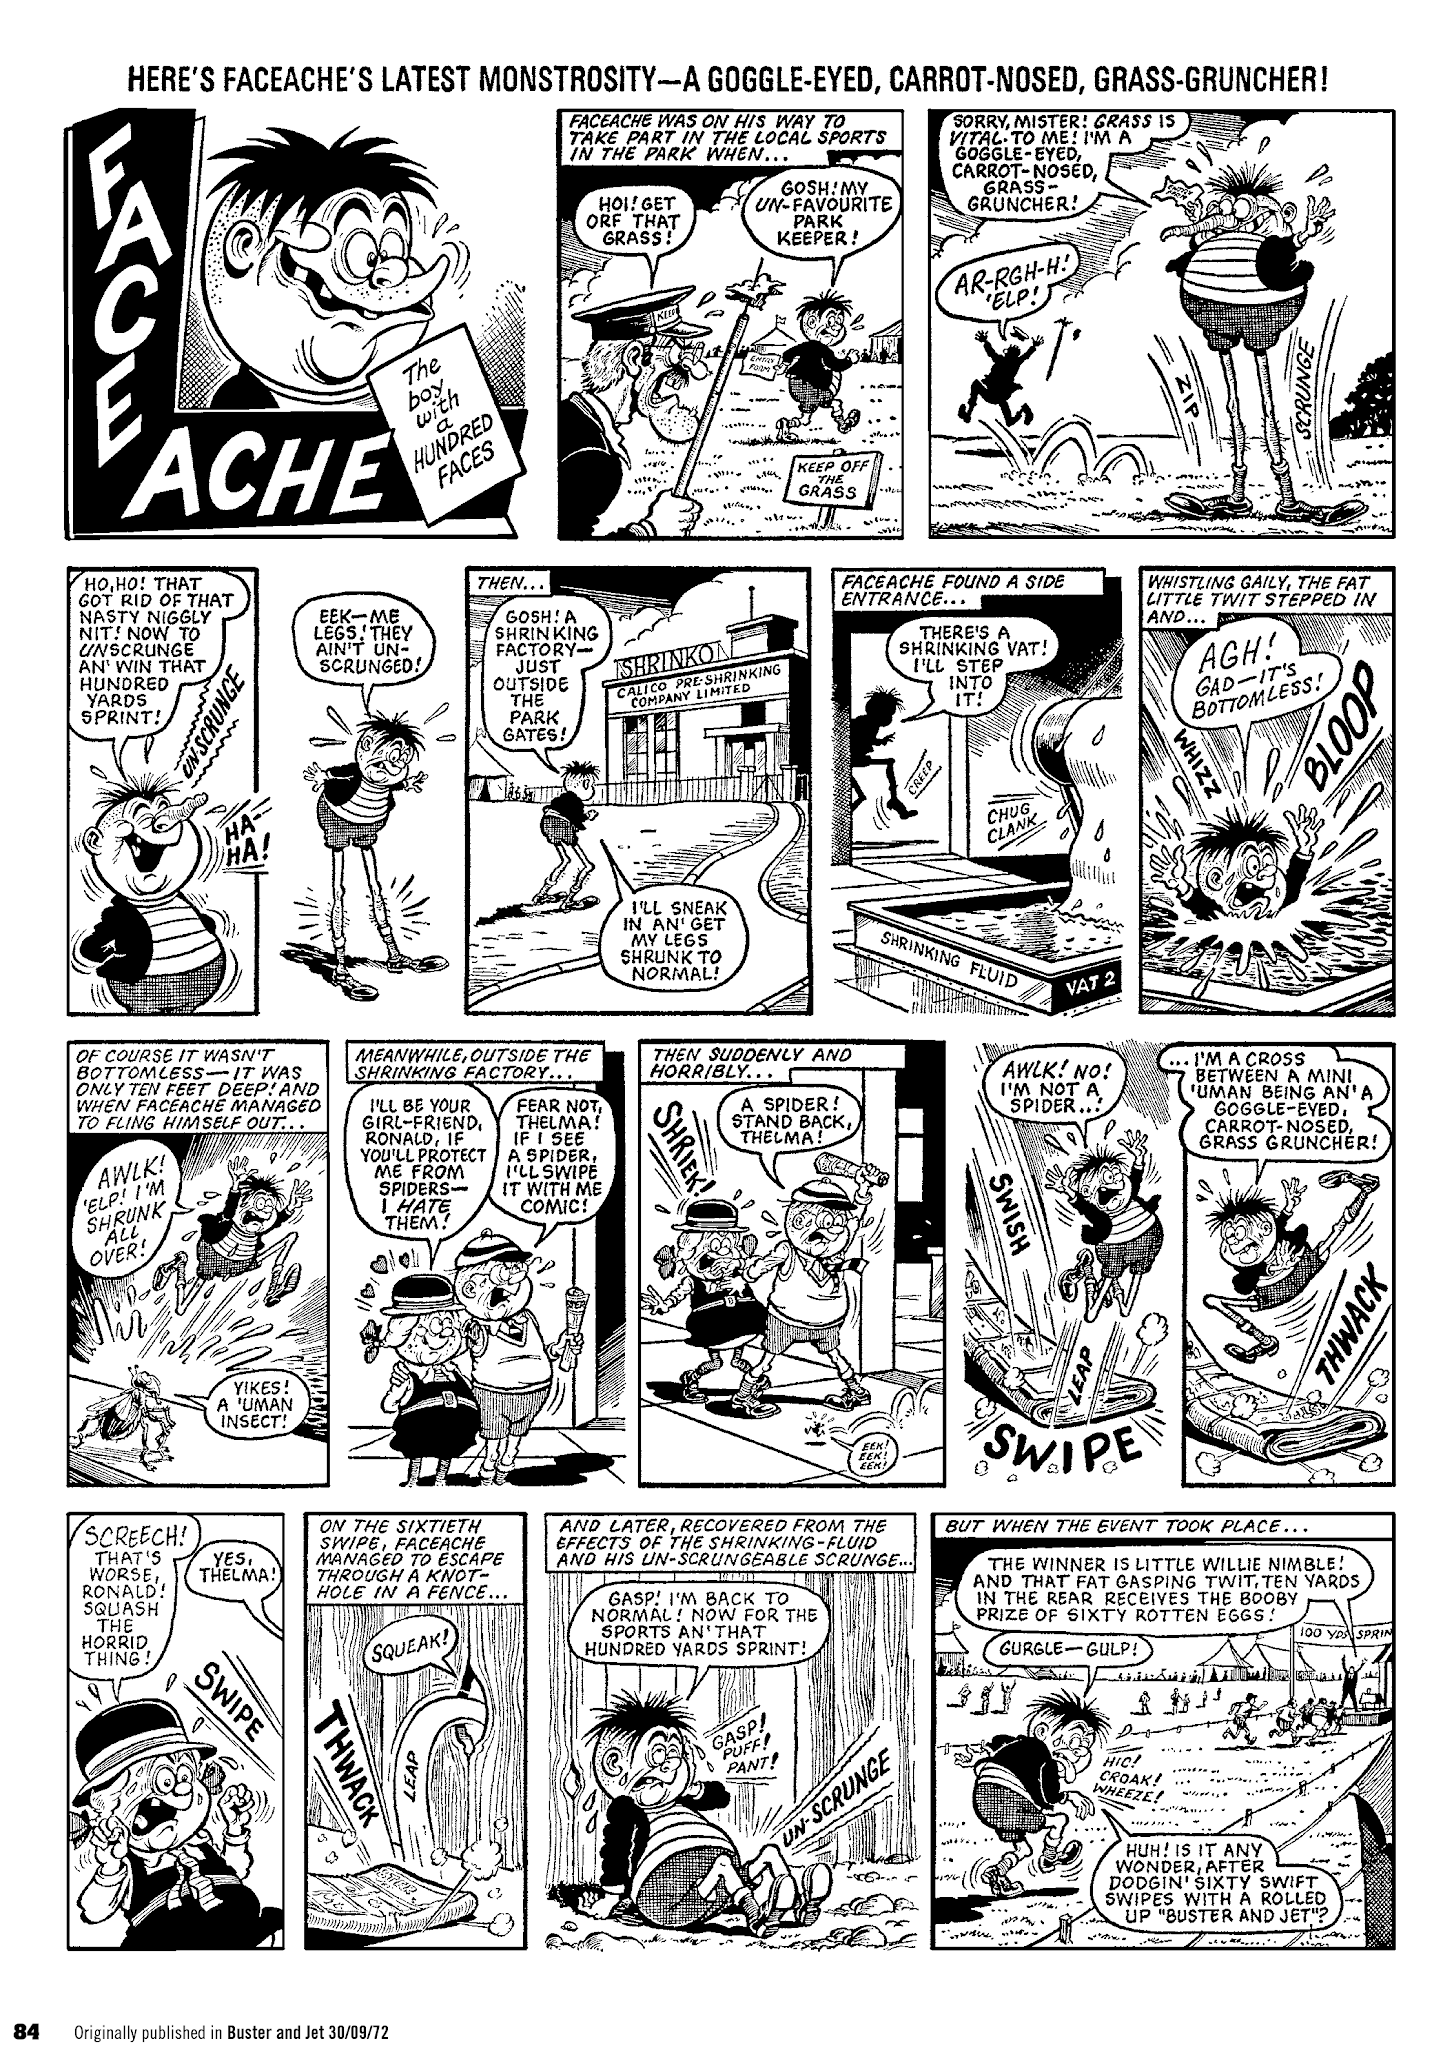 Read online Faceache: The First Hundred Scrunges comic -  Issue # TPB 1 - 86